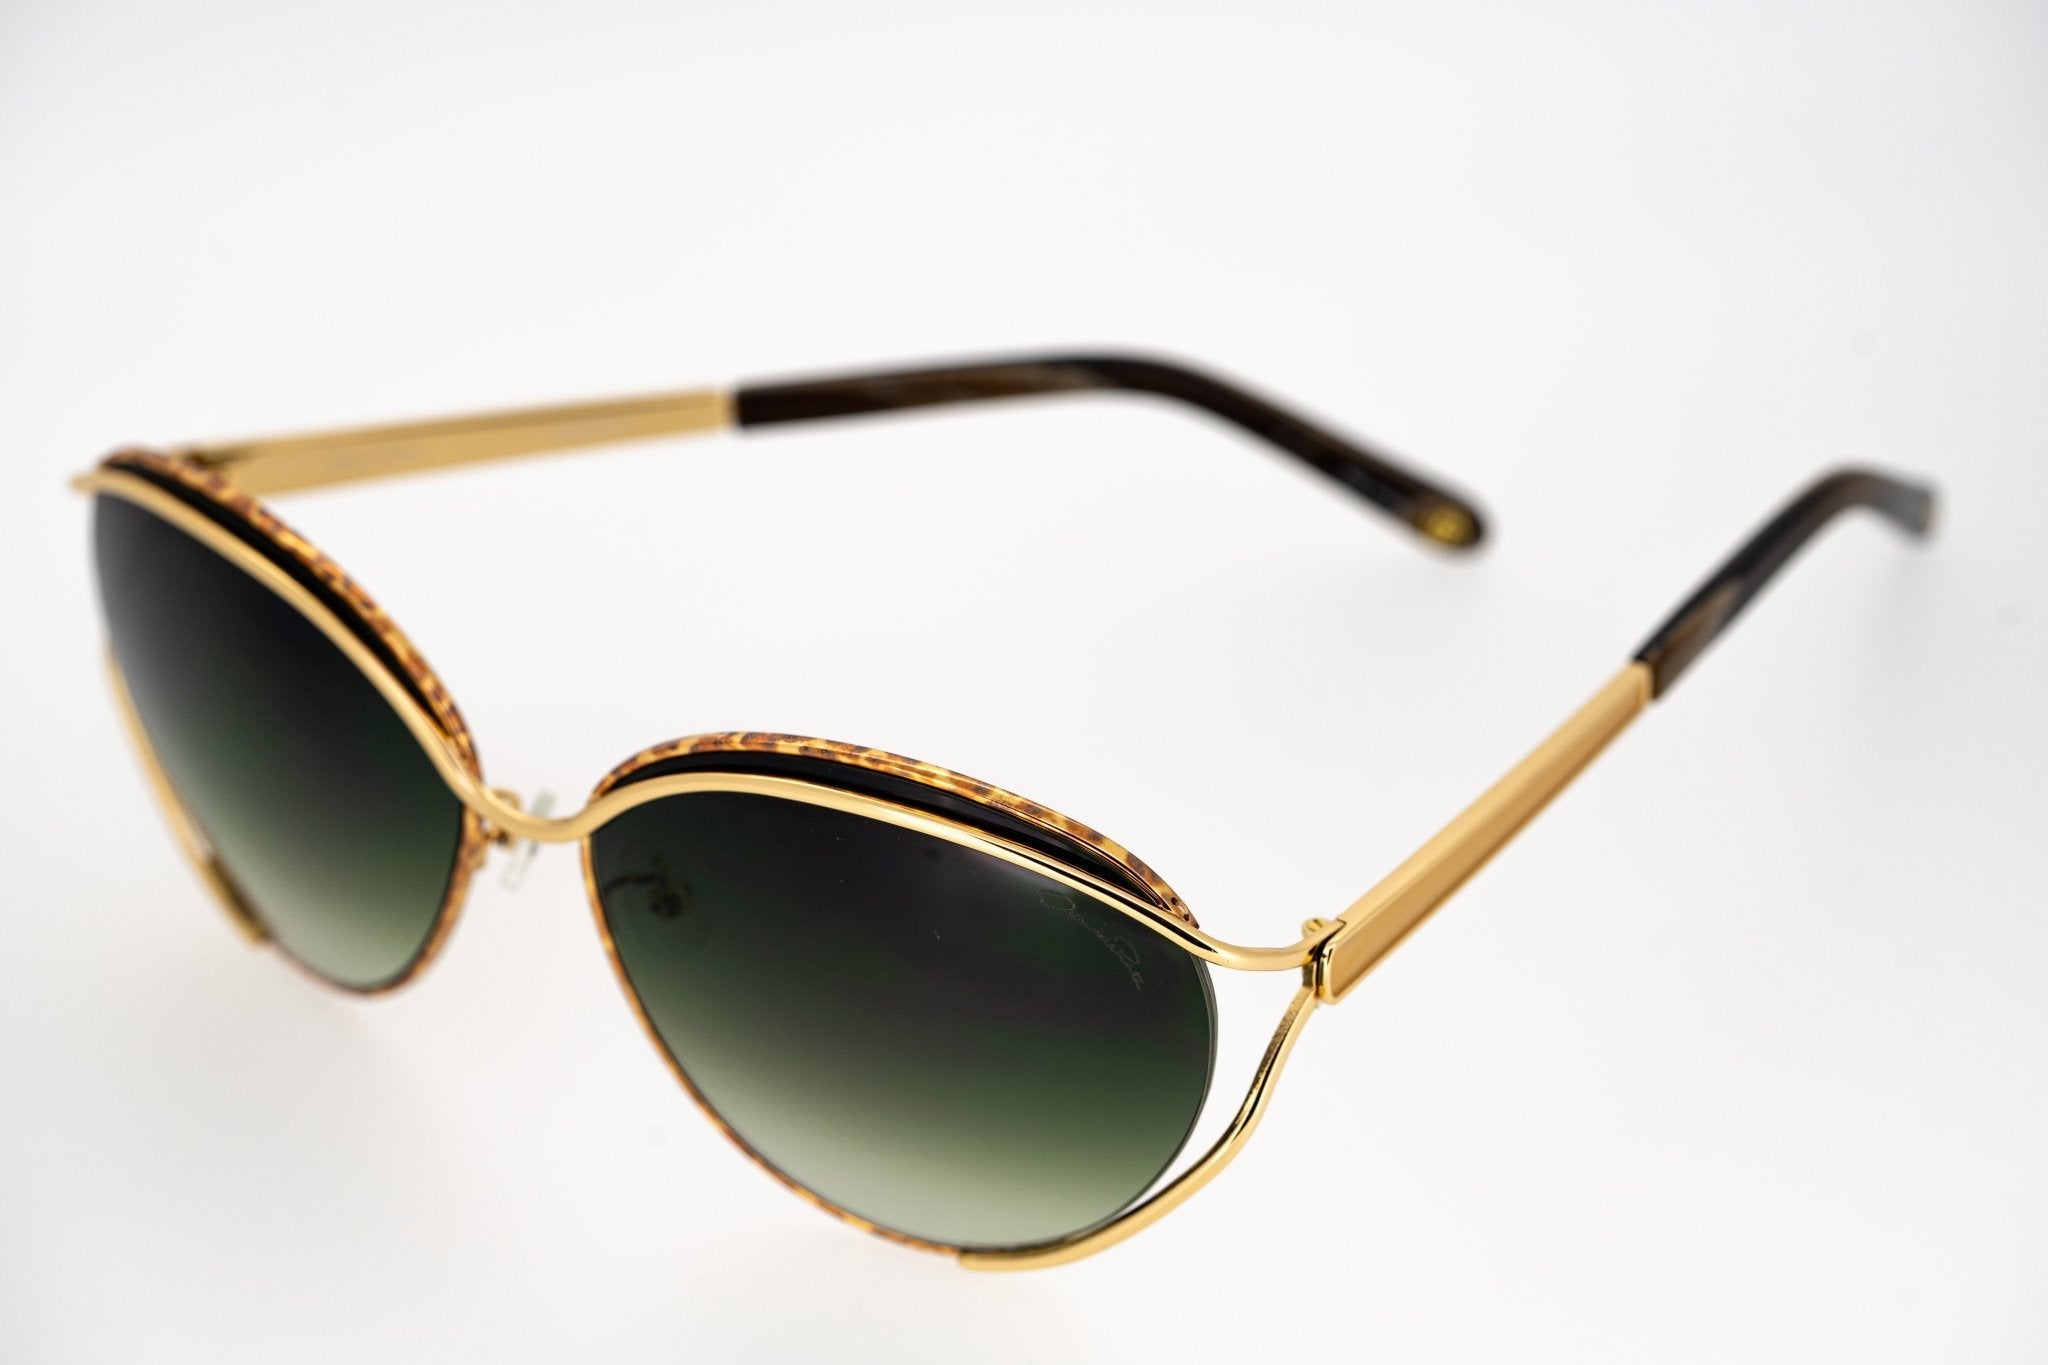 Oscar De La Renta Sunglasses Oval Frame Gold Amber With Green Graduated Lenses Category 3 ODLR61C1SUN - Watches & Crystals